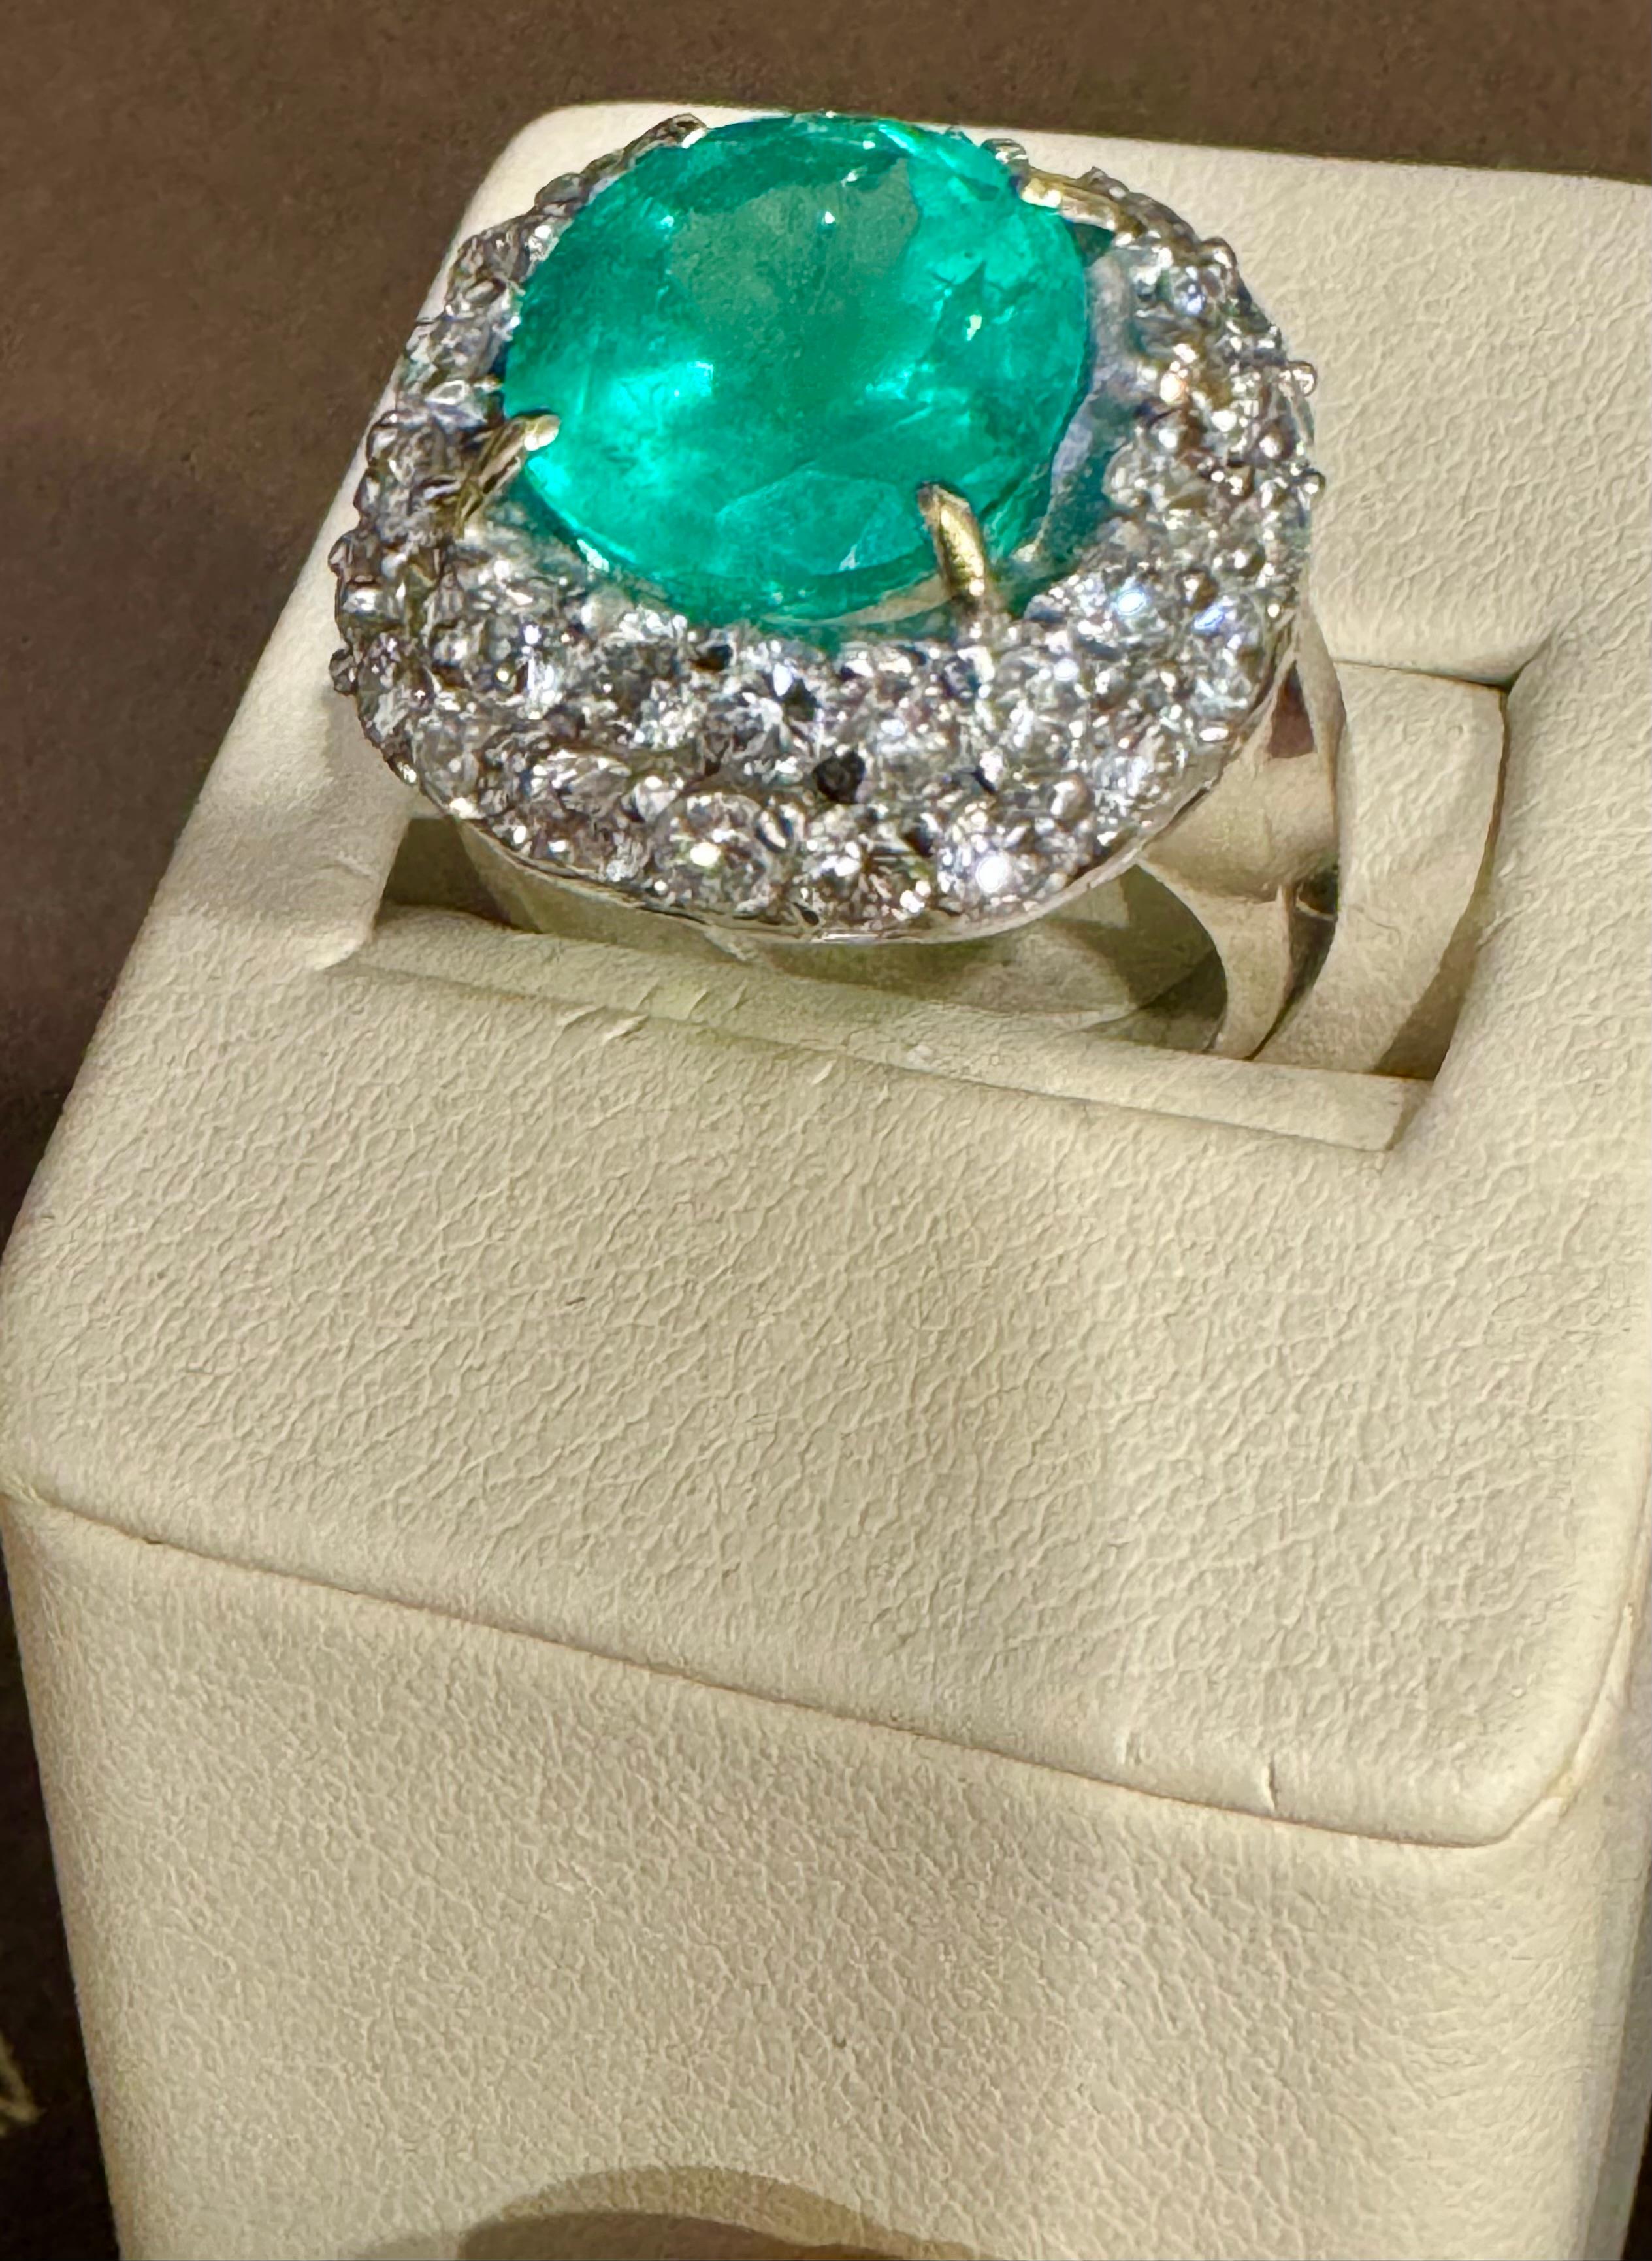 7 Carat Cushion Cut Colombian Emerald & 3.5 Ct Diamond Ring in Platinum Size 6.2 For Sale 3